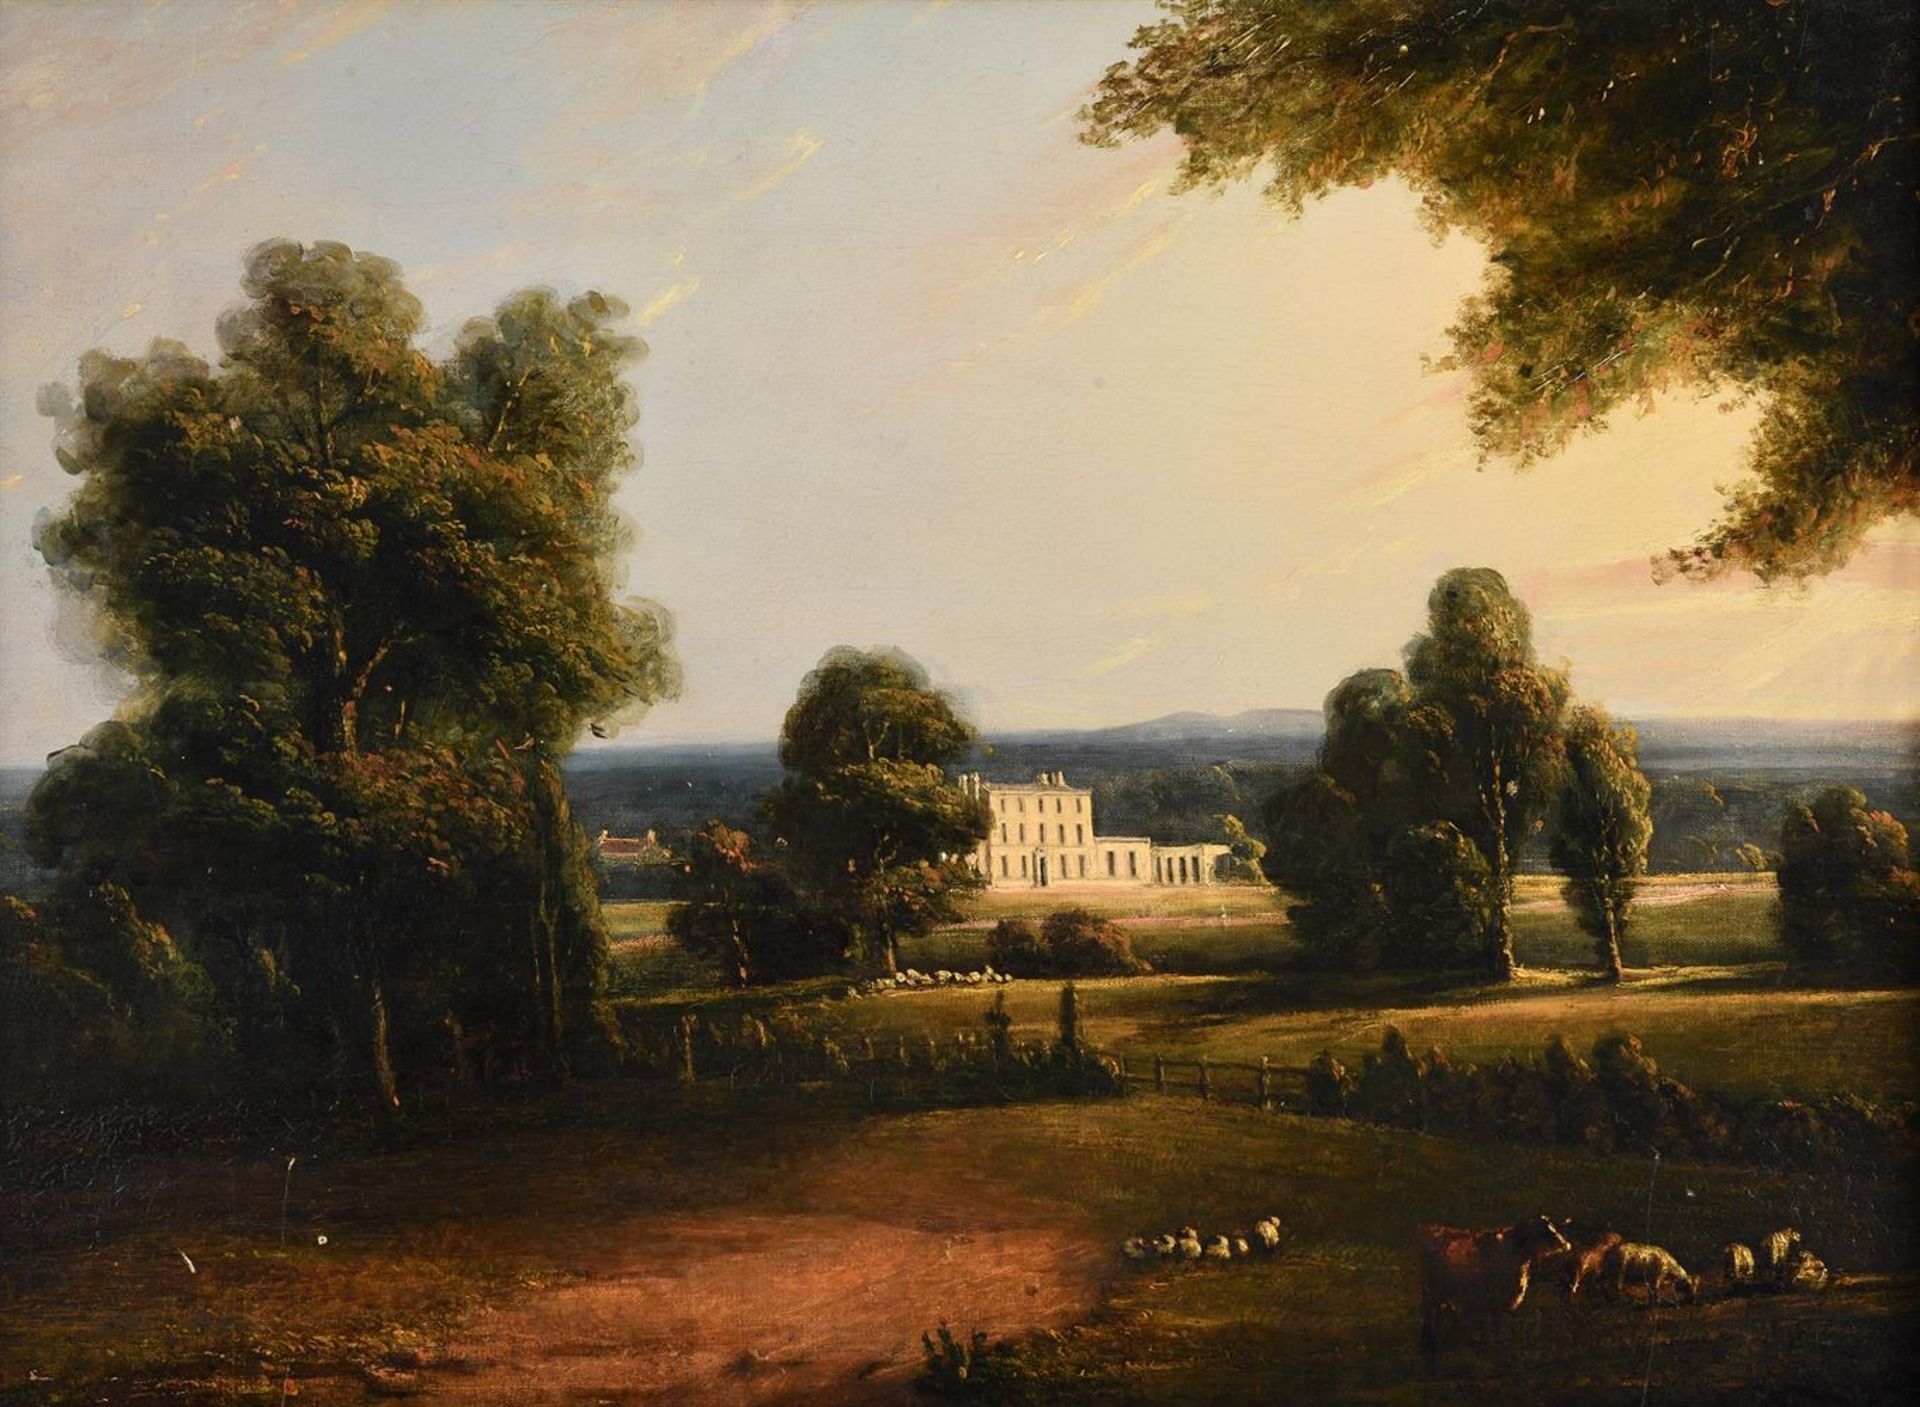 Scottish School (c. 1800), A country house in an extensive landscape